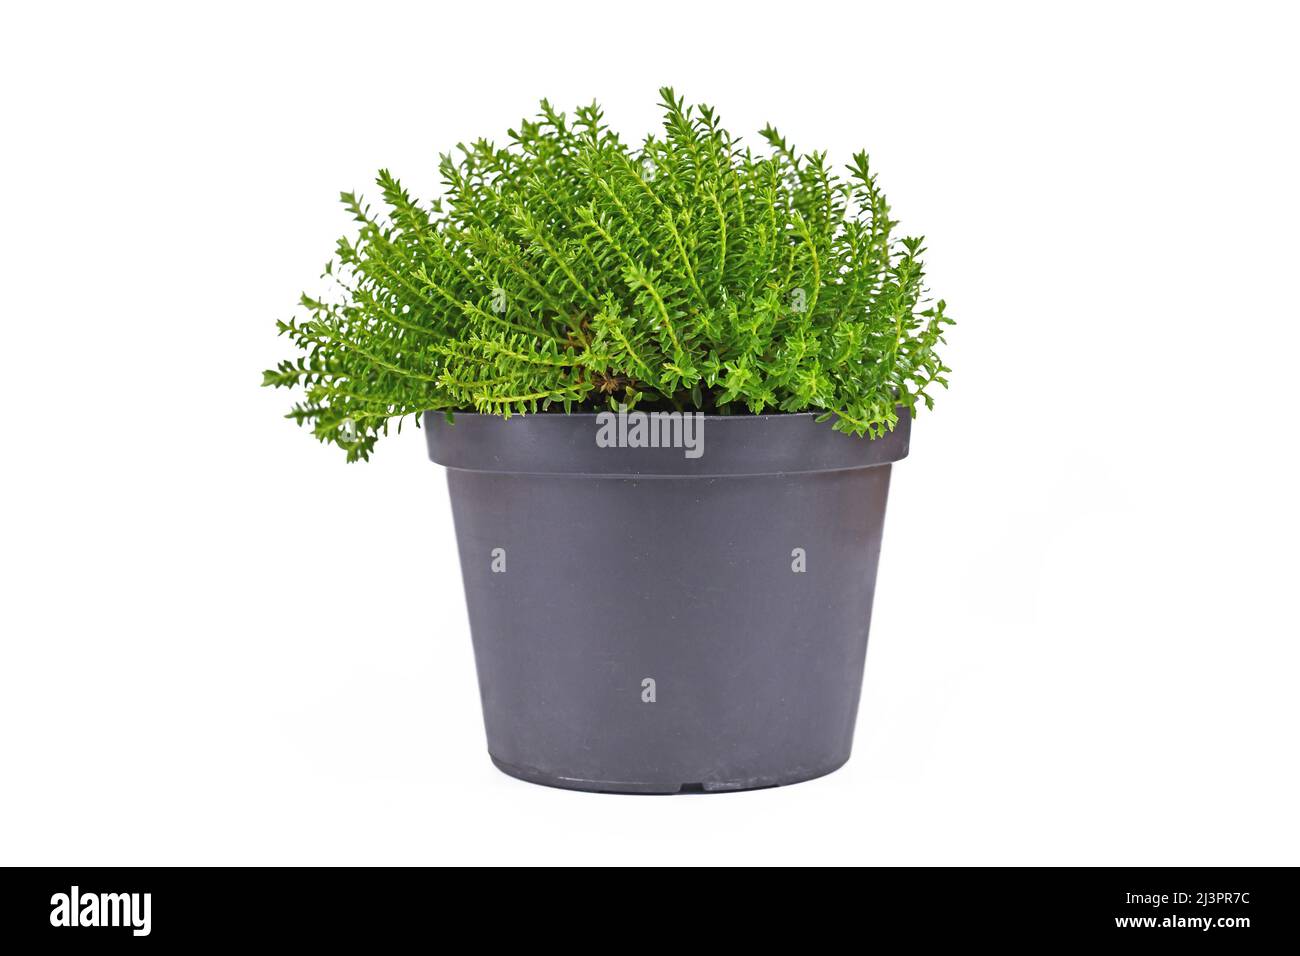 Potted 'Hebe Armstrongii' garden plant on white background Stock Photo